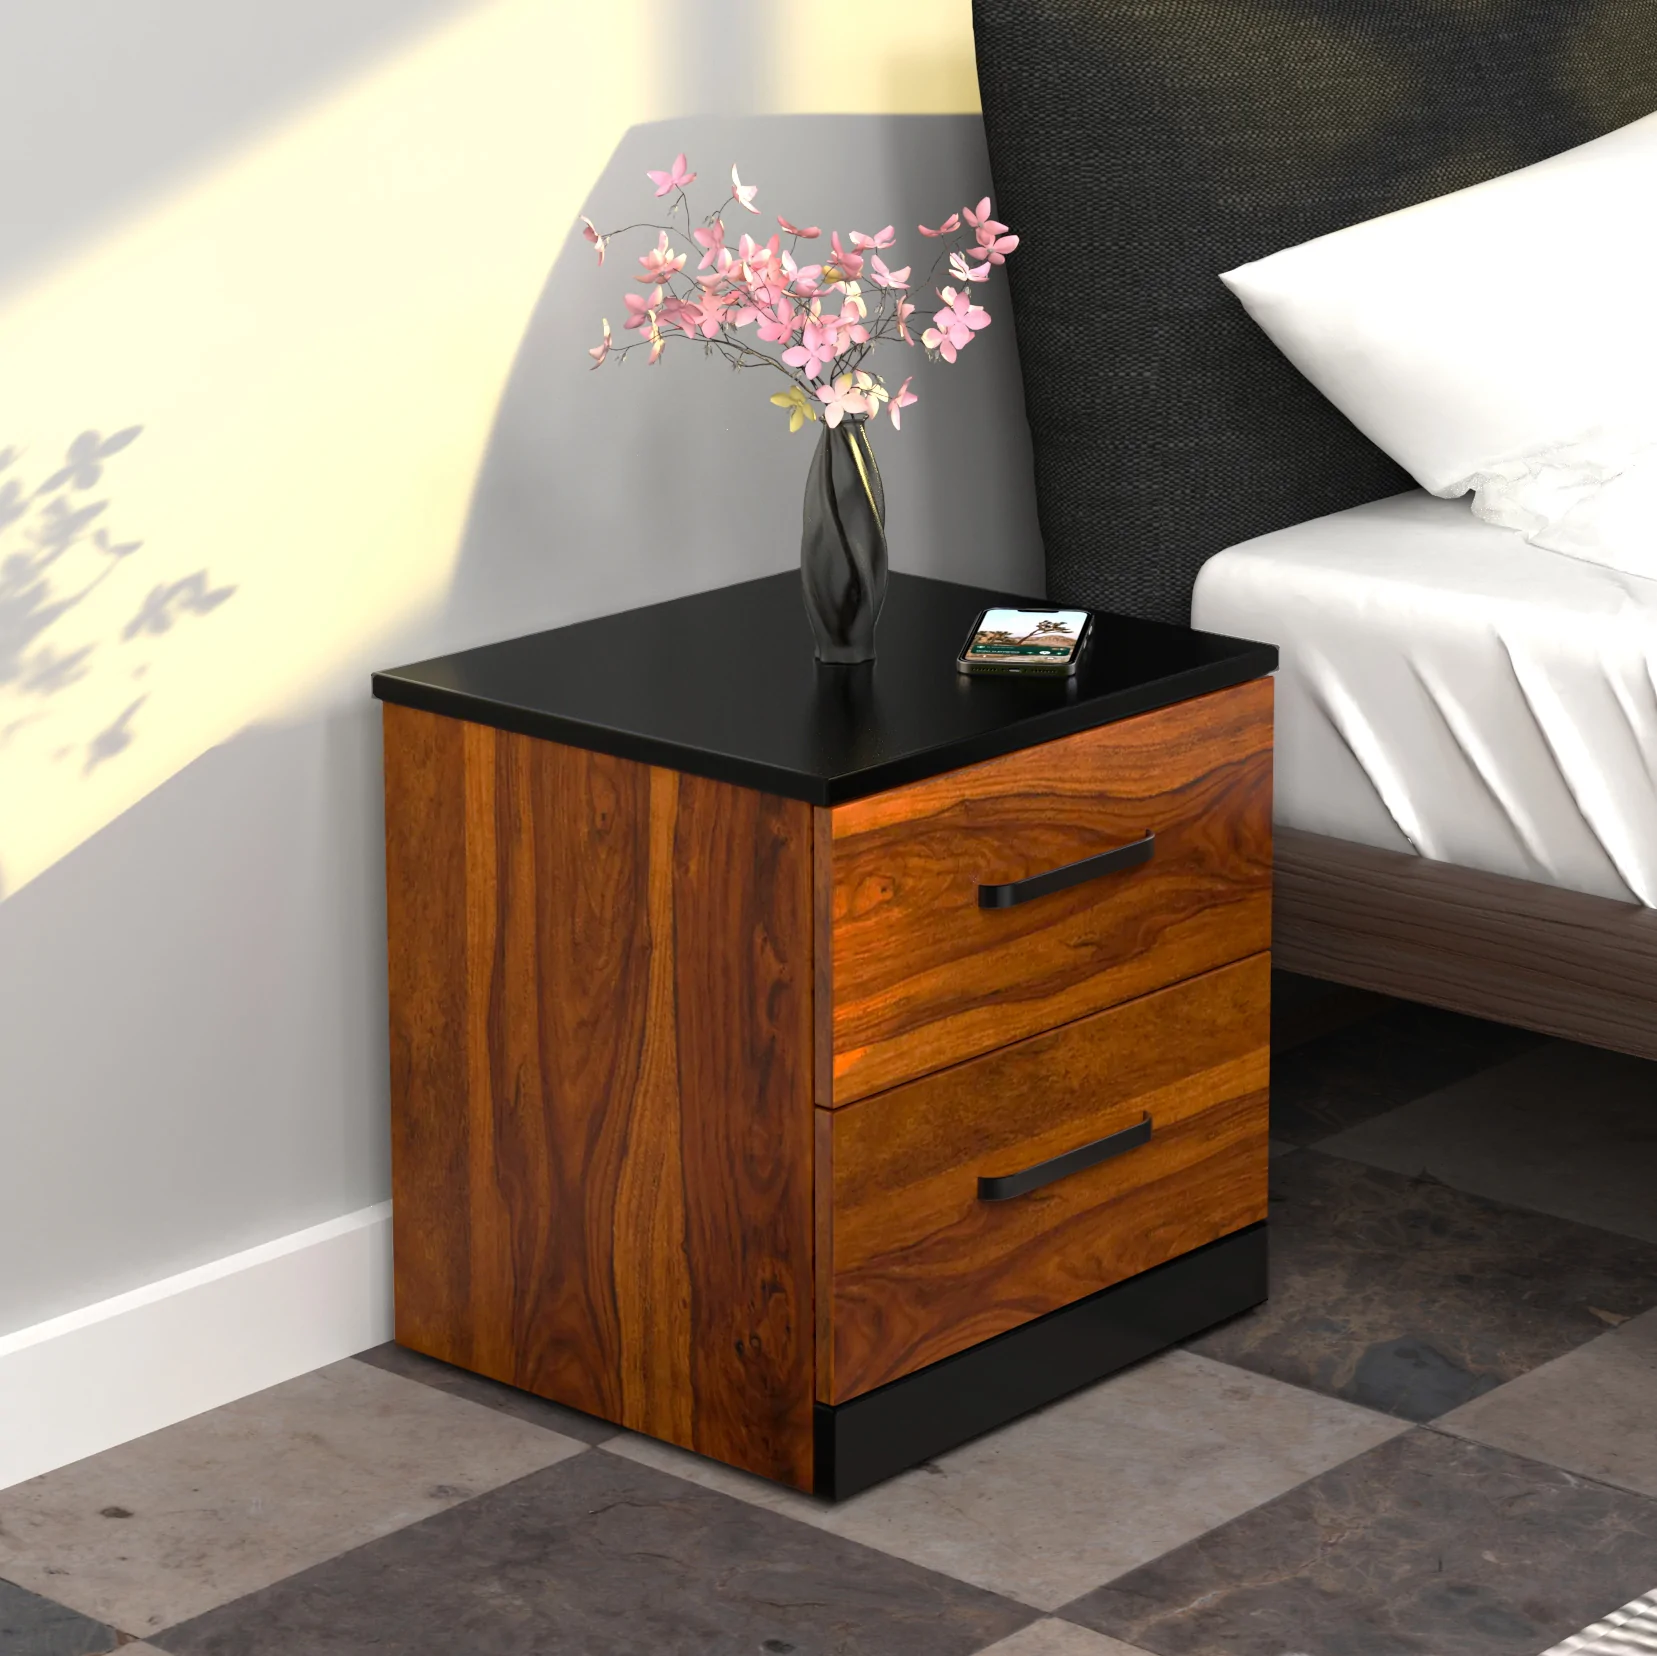 engineered wood side table placed in bedroom, flower vase placed on table, bed